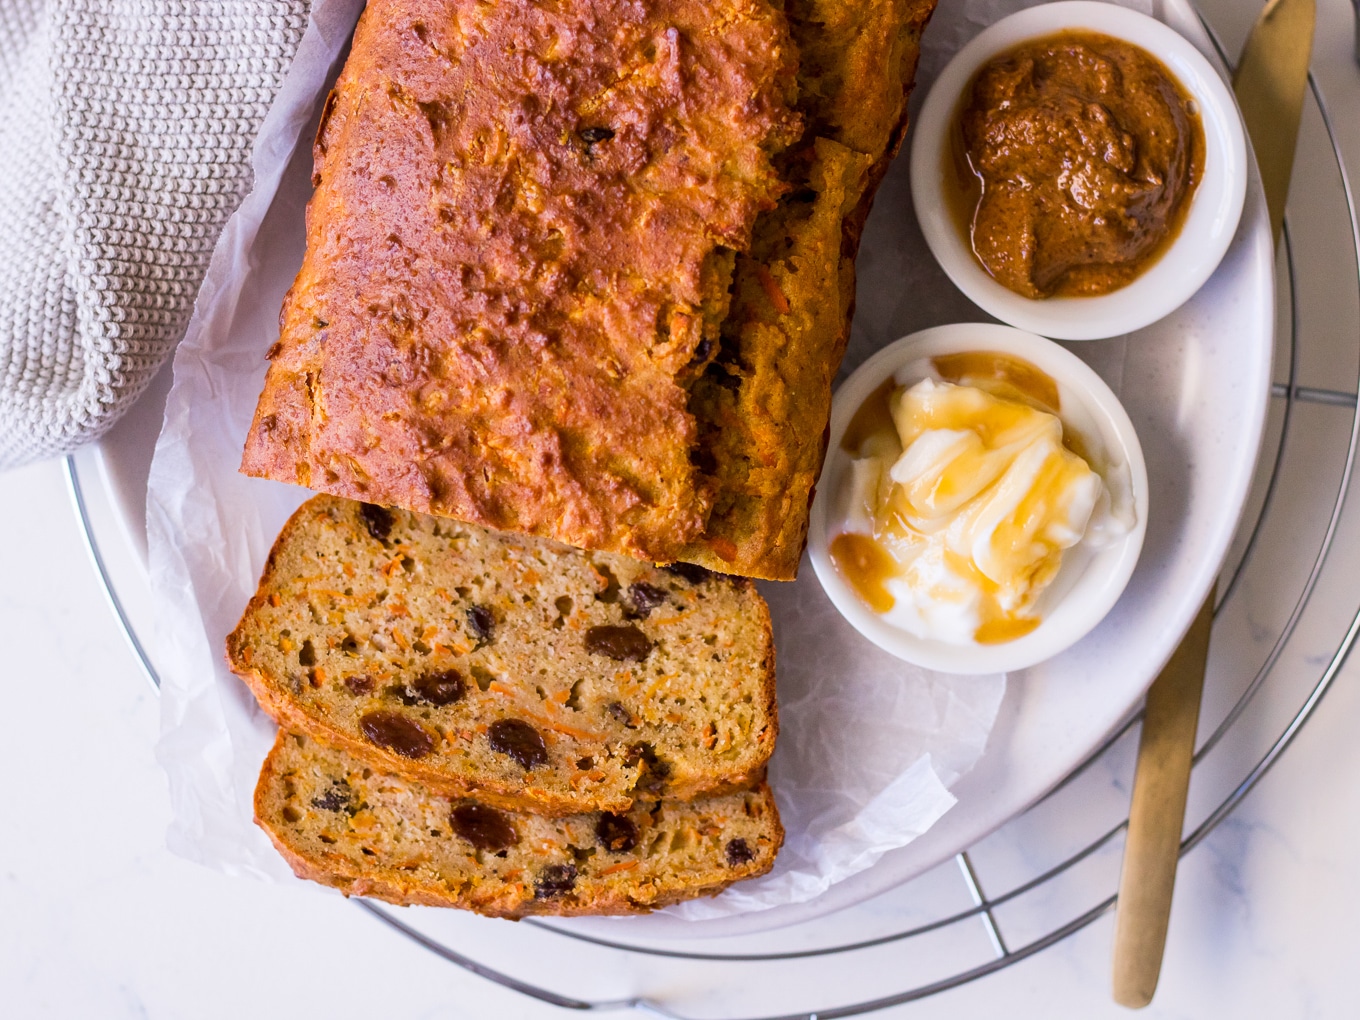 Banana, Carrot and Sultana Loaf Recipe by Nourish Every Day